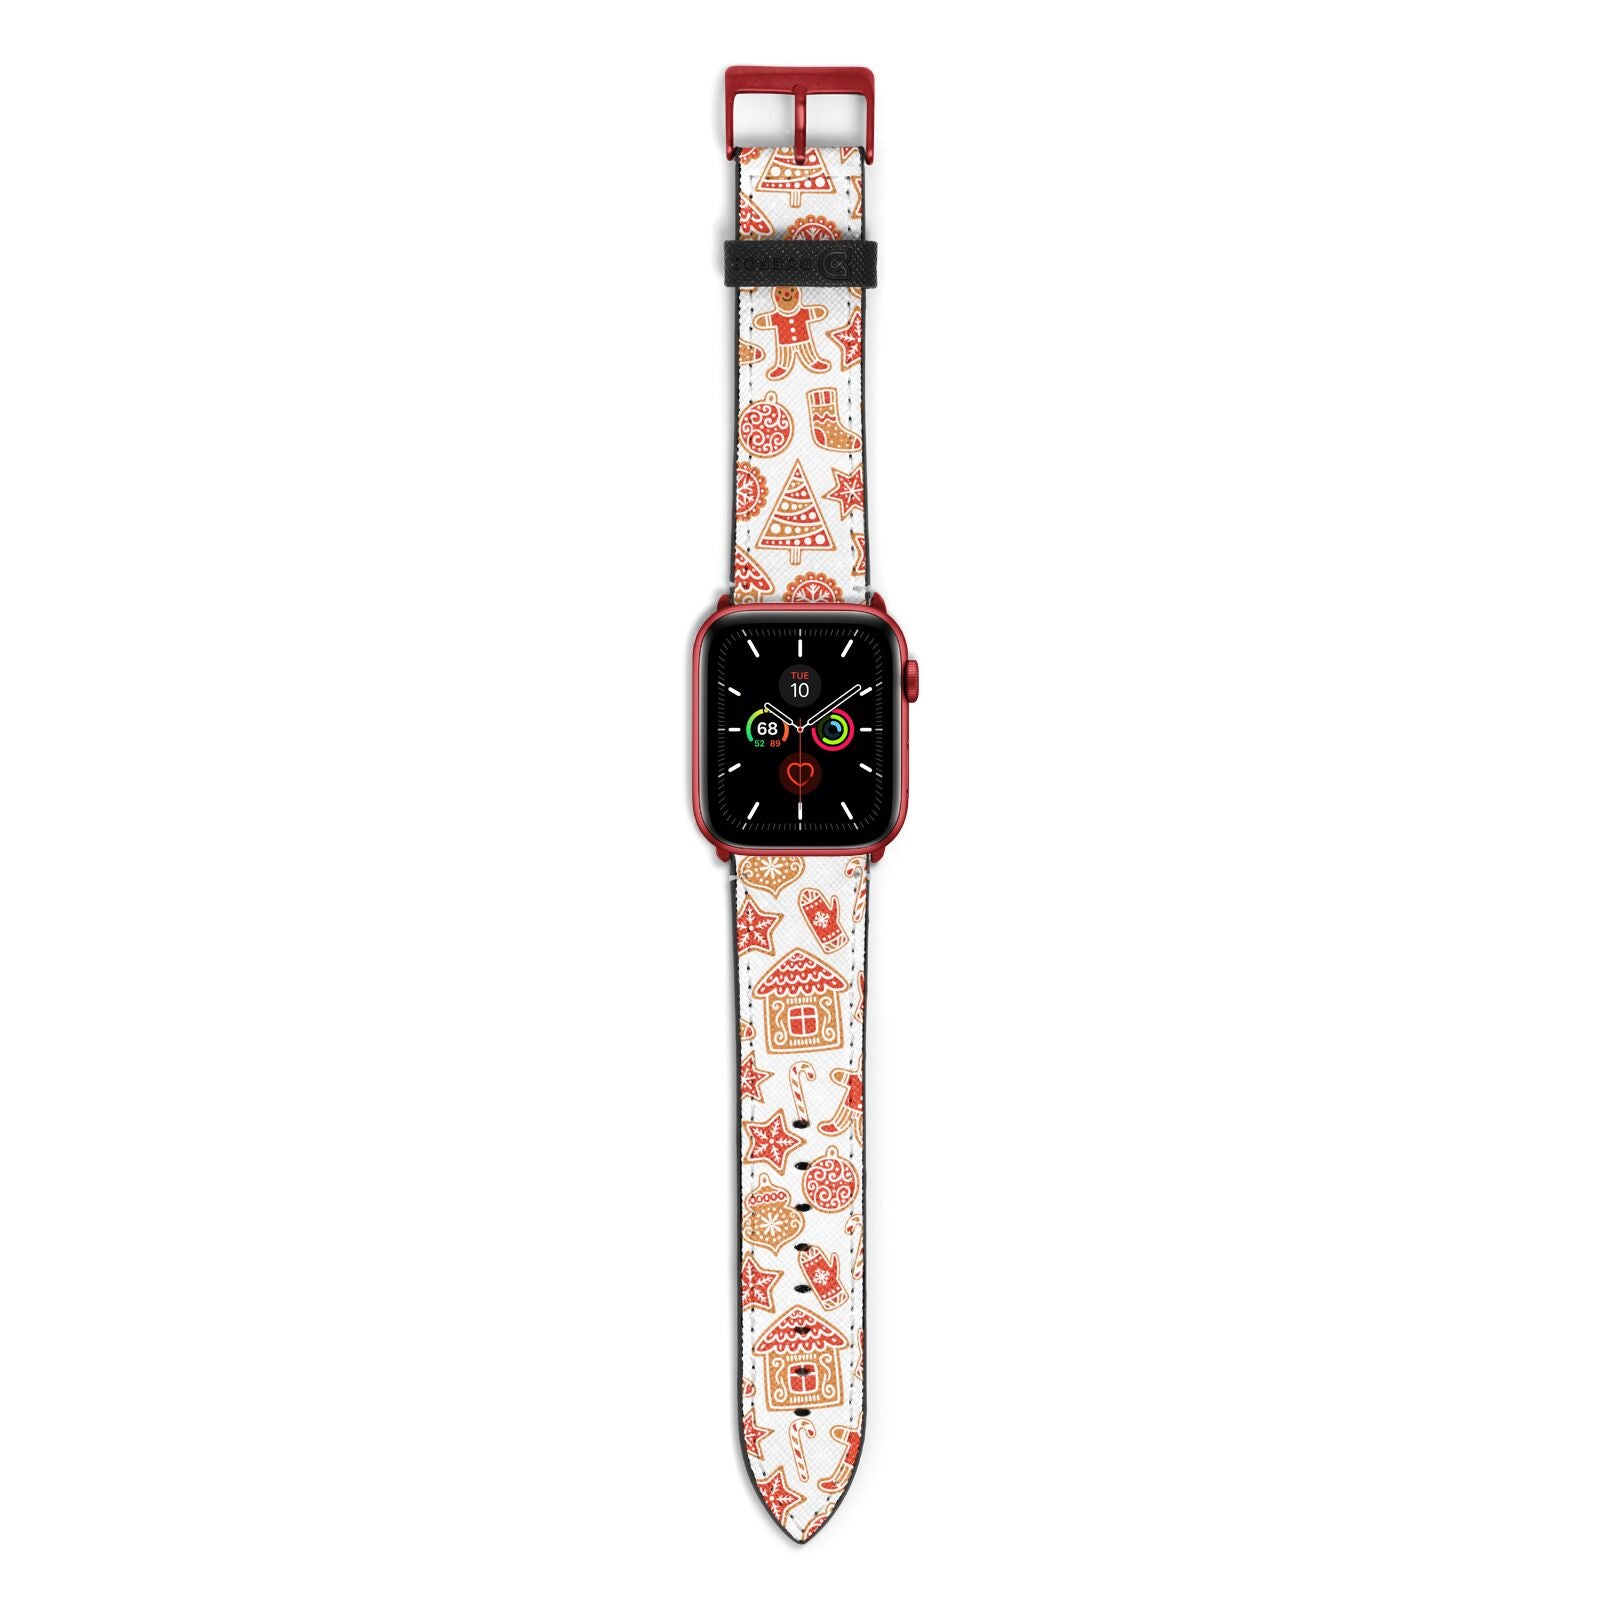 Christmas Gingerbread Apple Watch Strap with Red Hardware